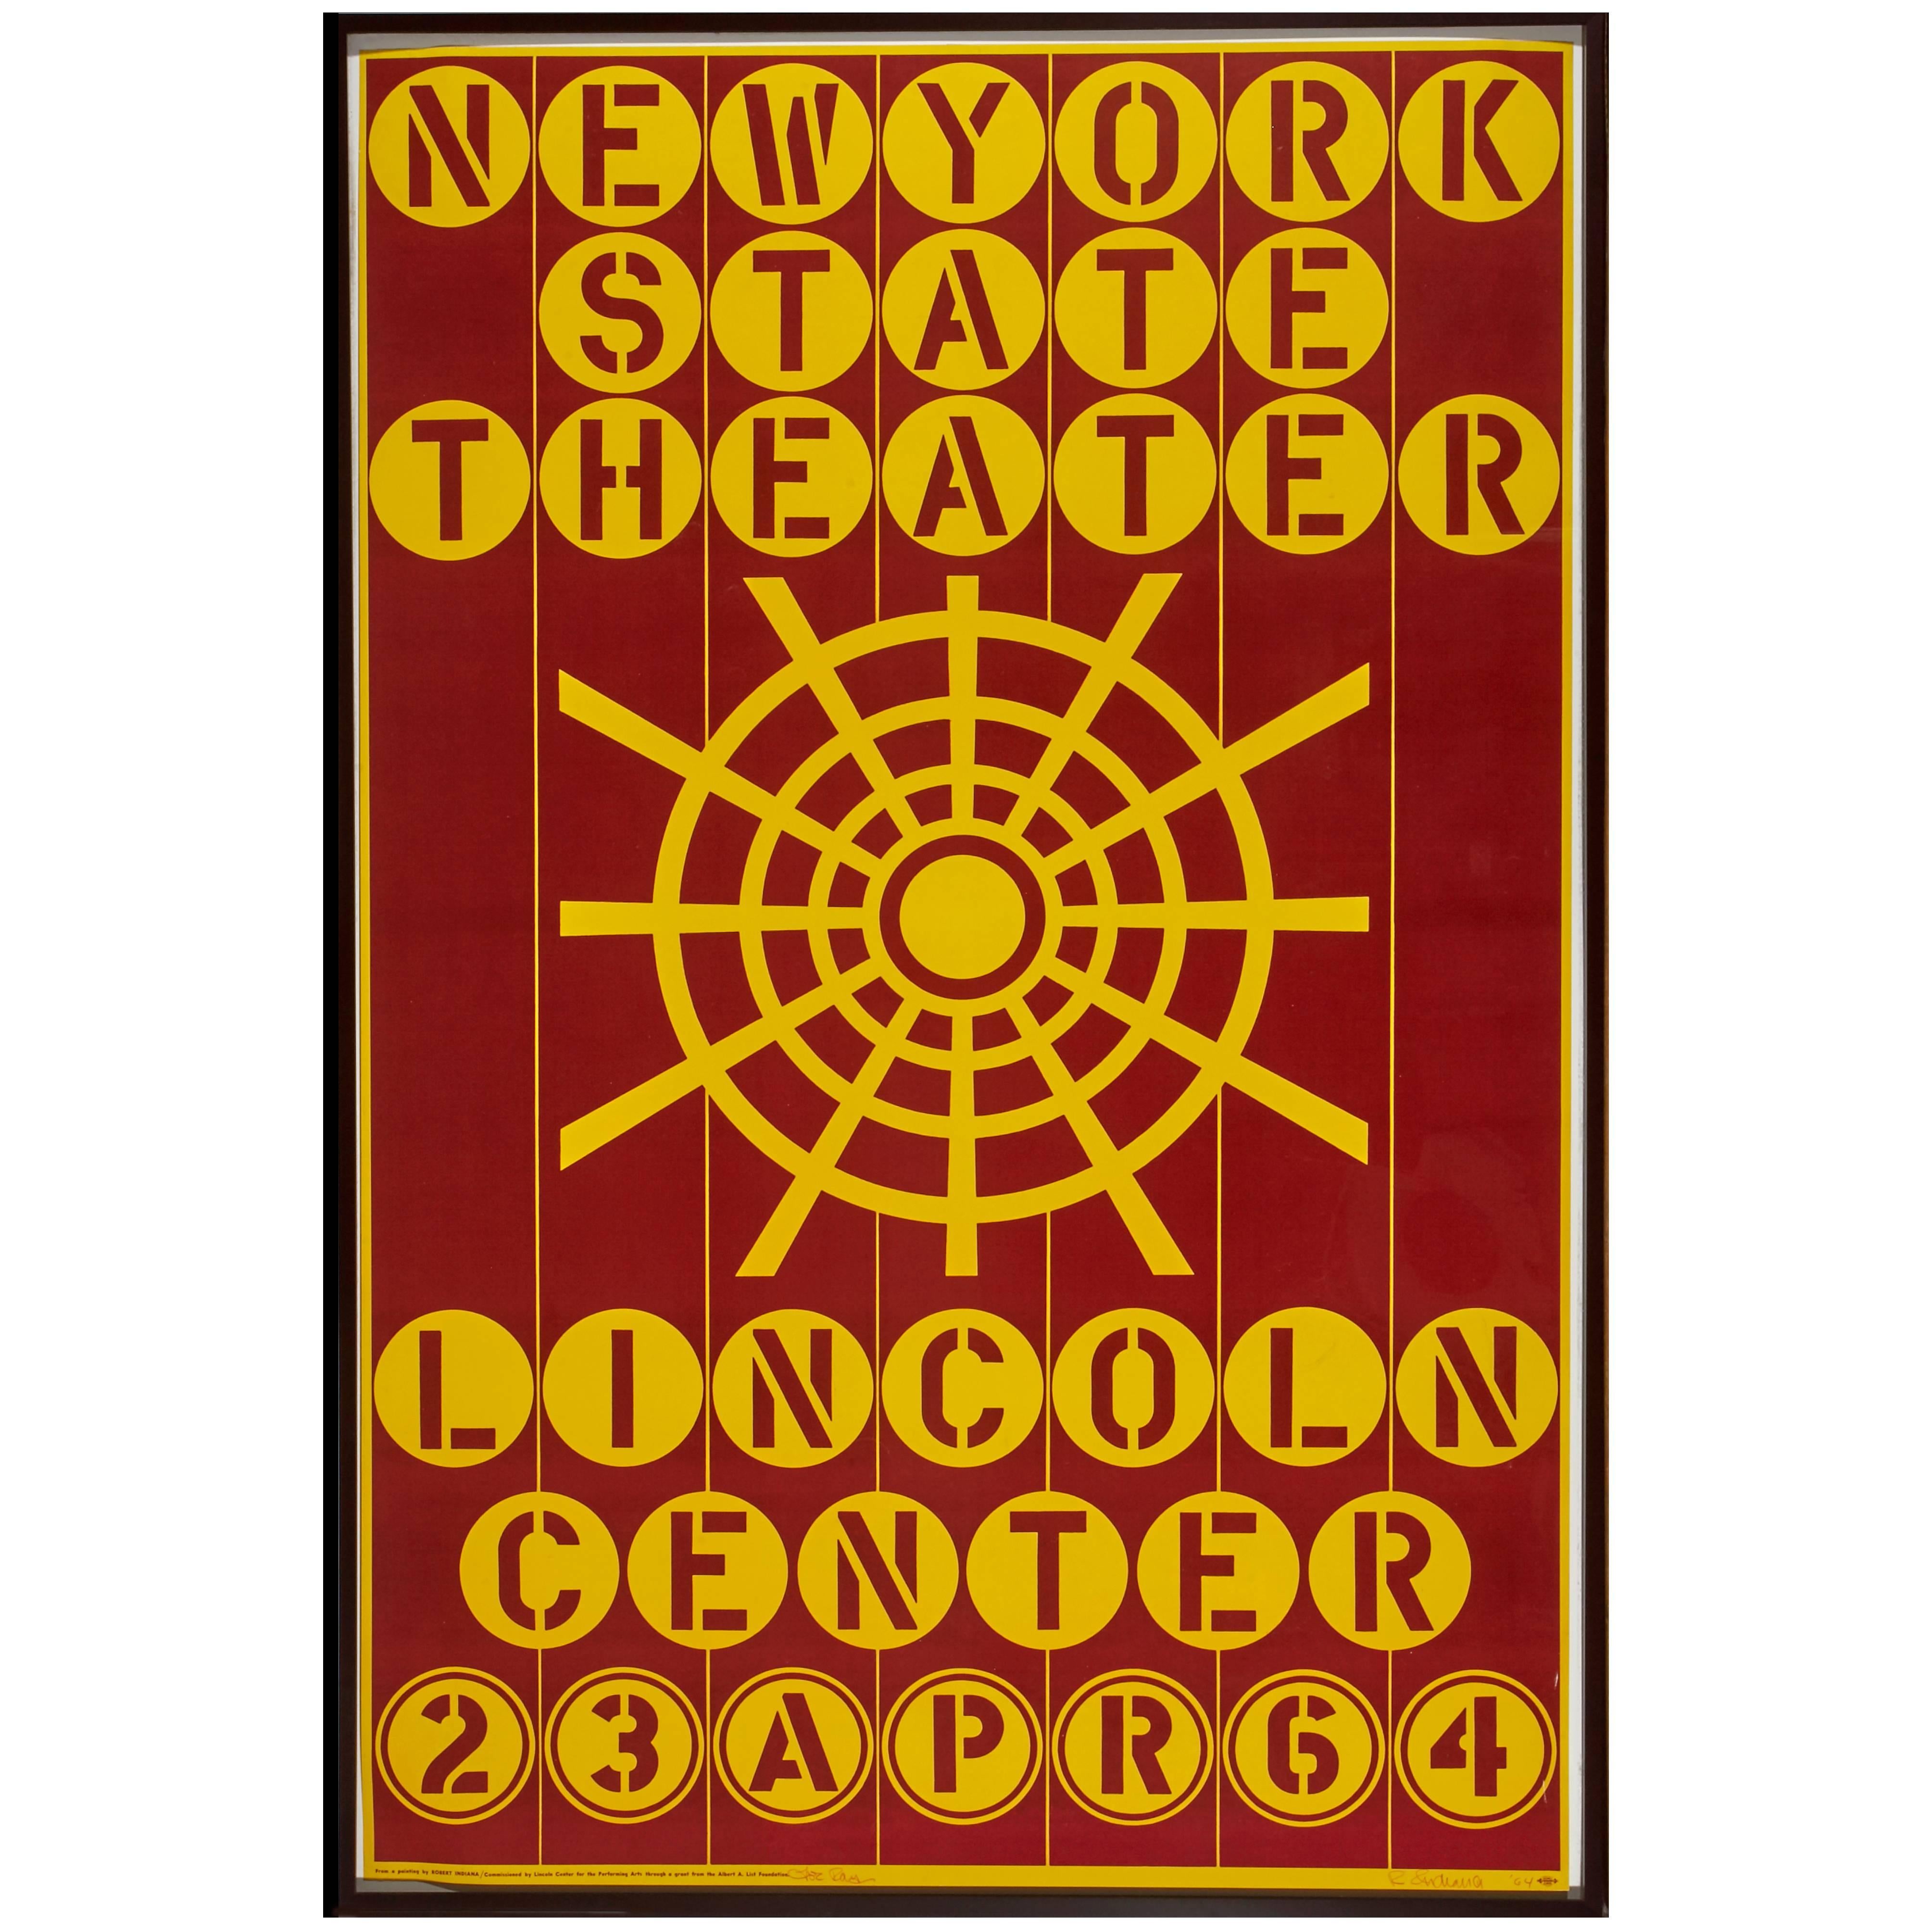 Robert Indiana, New York State Theatre, Lincoln Center Poster For Sale